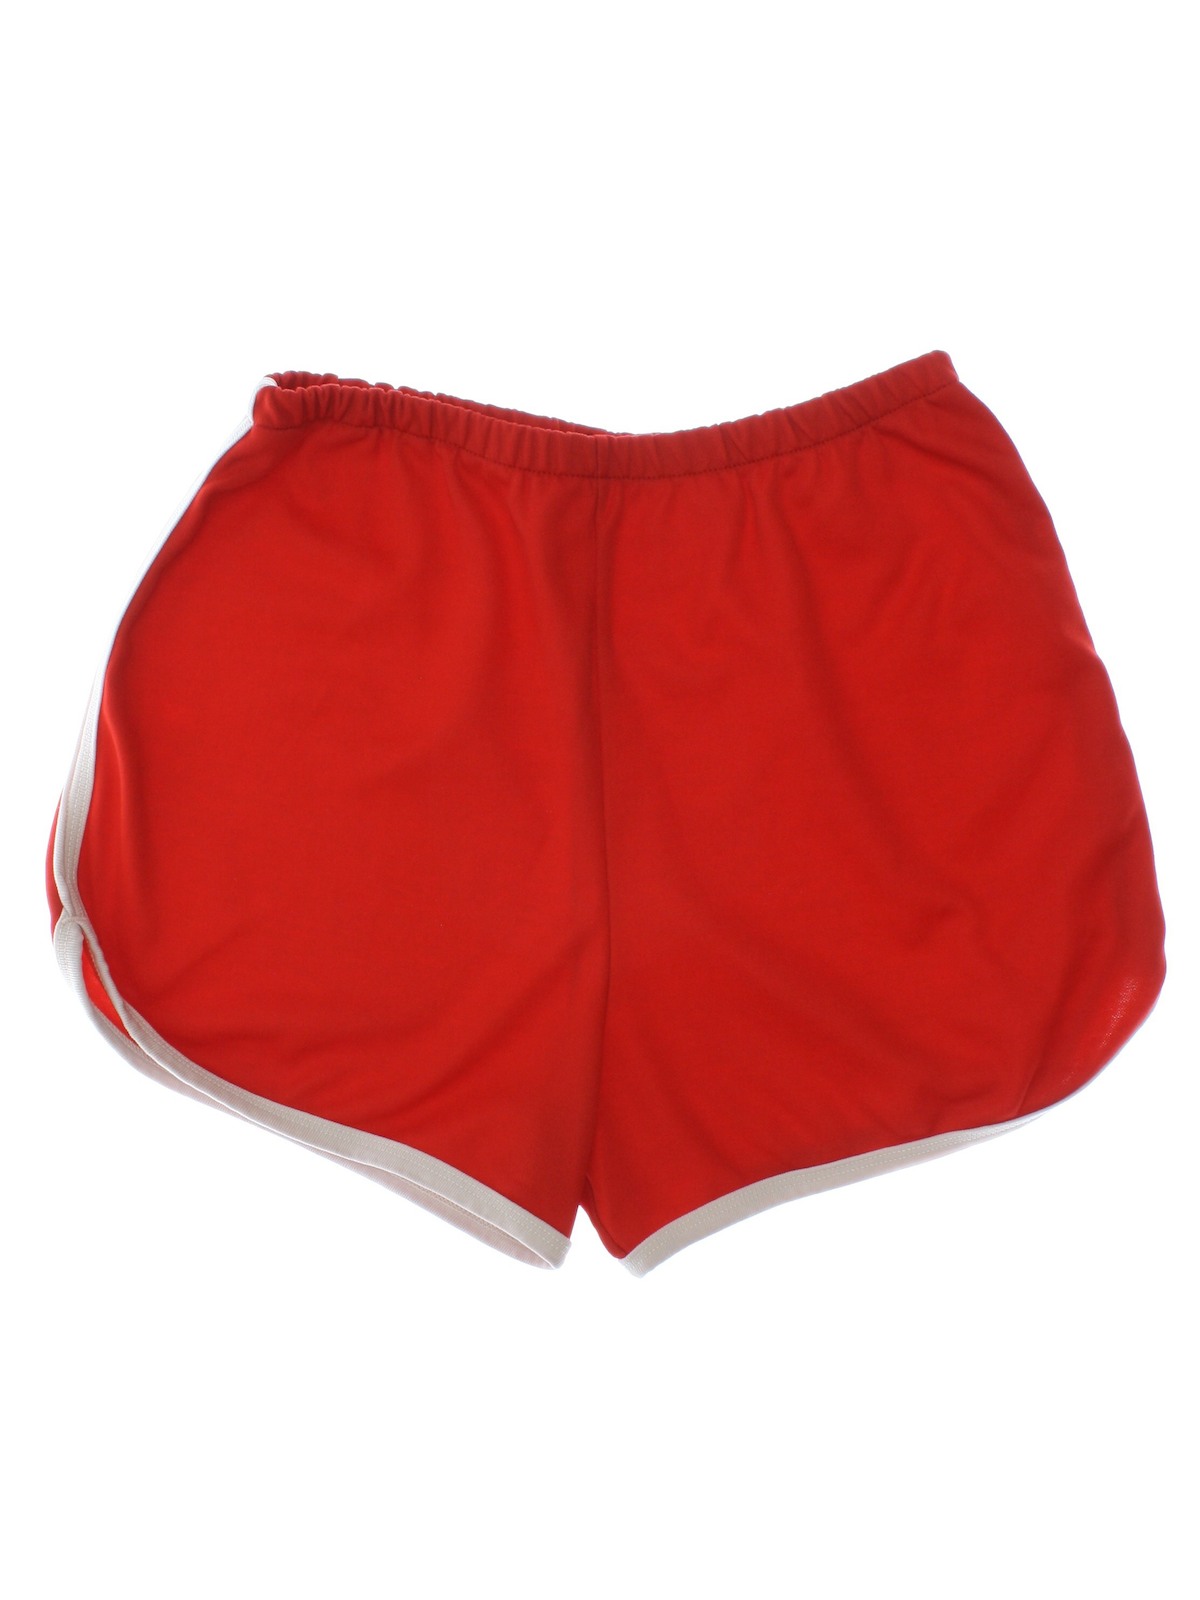 Vintage 80s Shorts: 80s -Russell- Womens red background